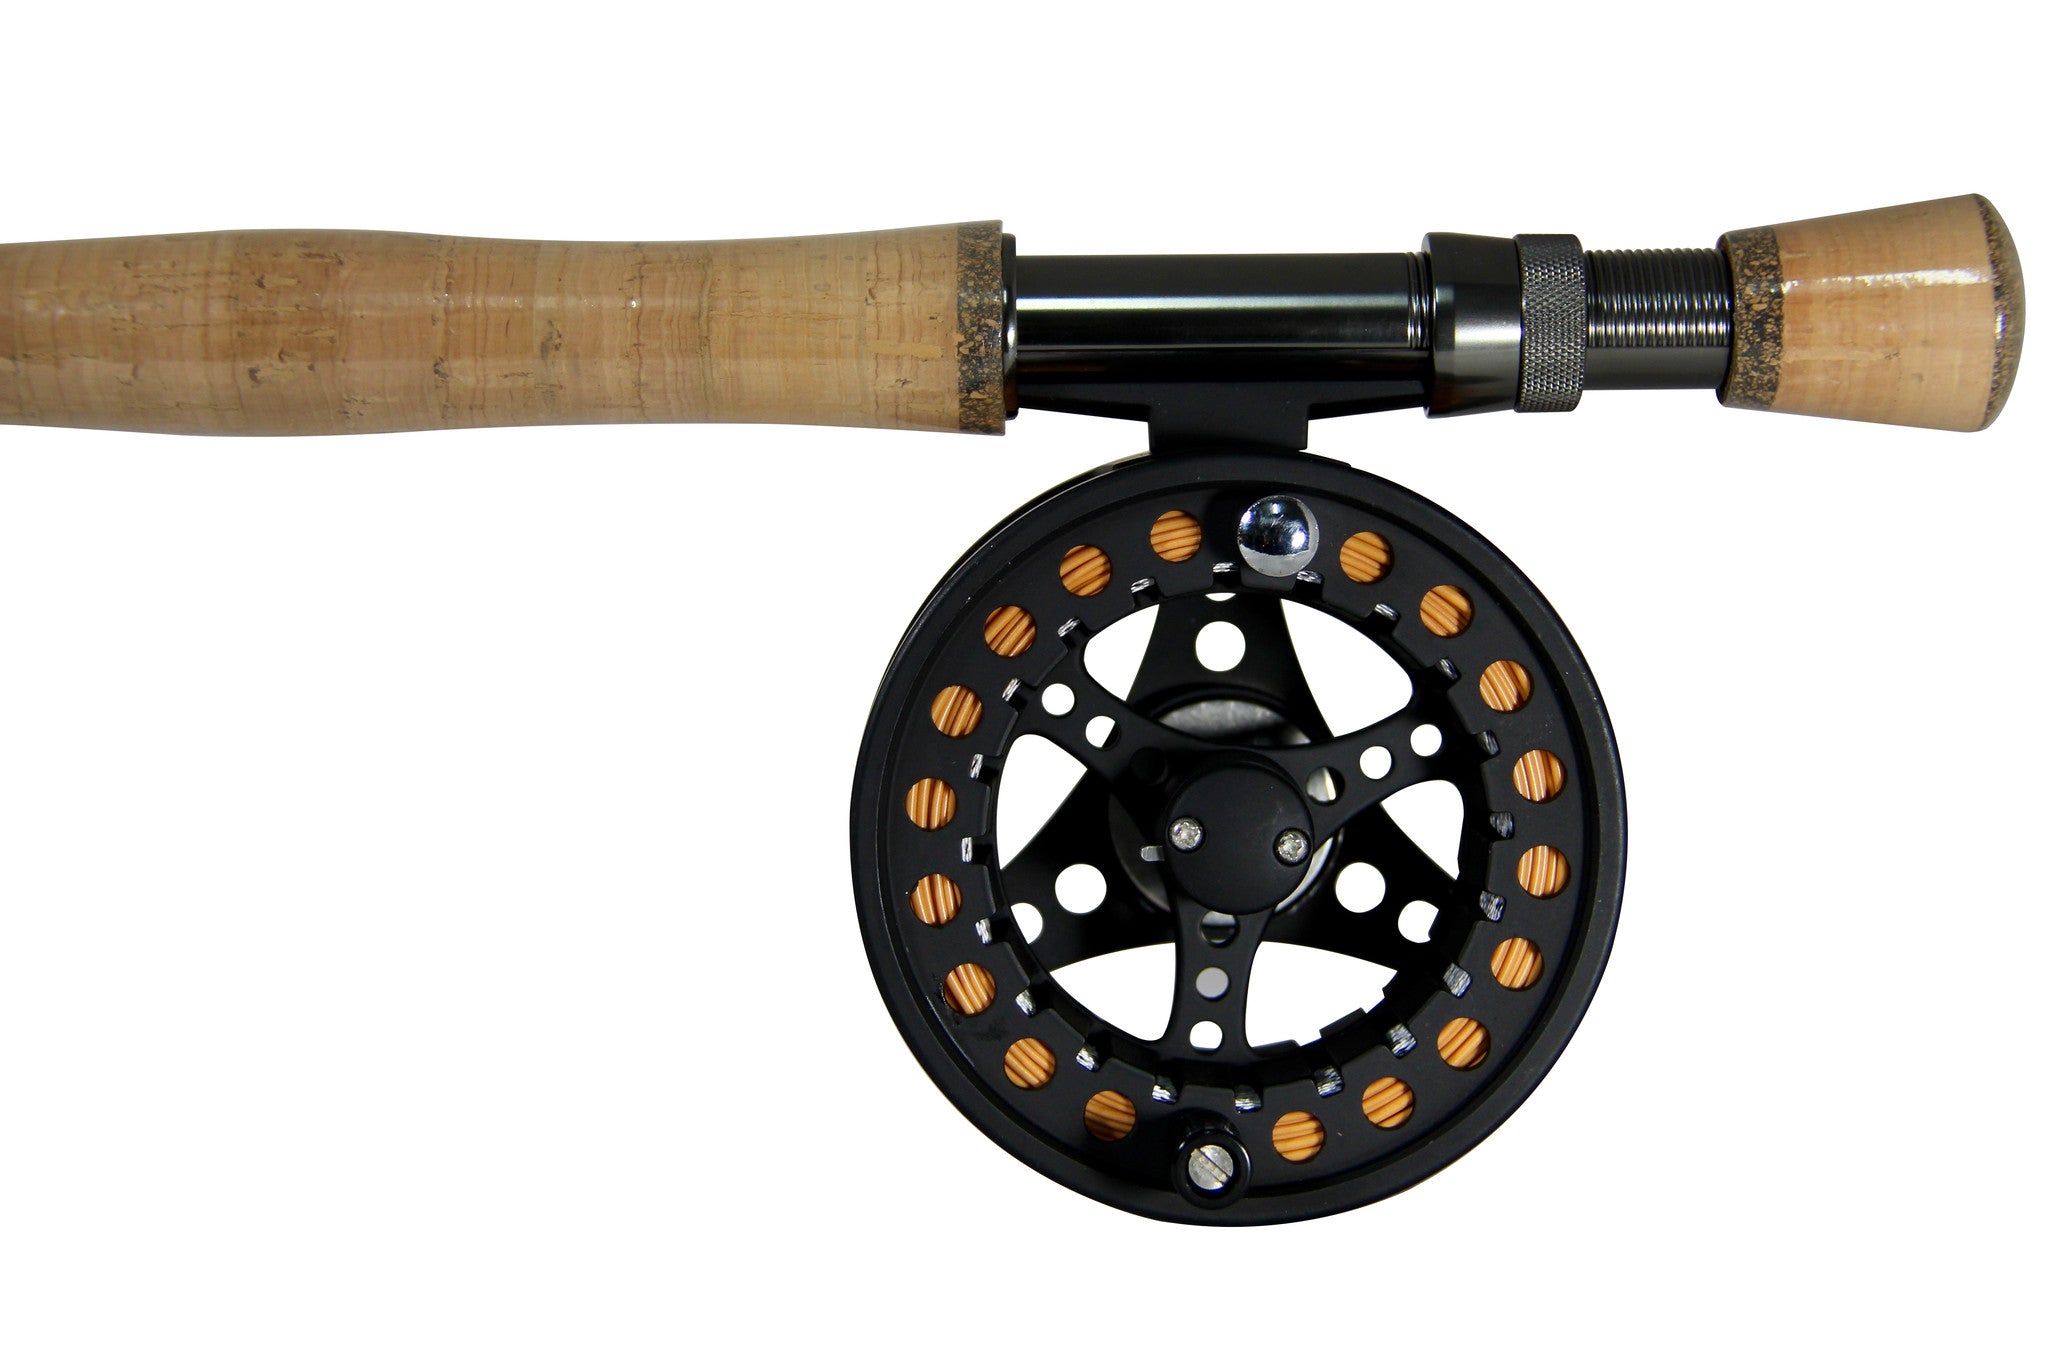 Kinetic AIRBORN CT Fly COMBO ✴️️️ Fly fishing rods ✓ TOP PRICE - Angling  PRO Shop